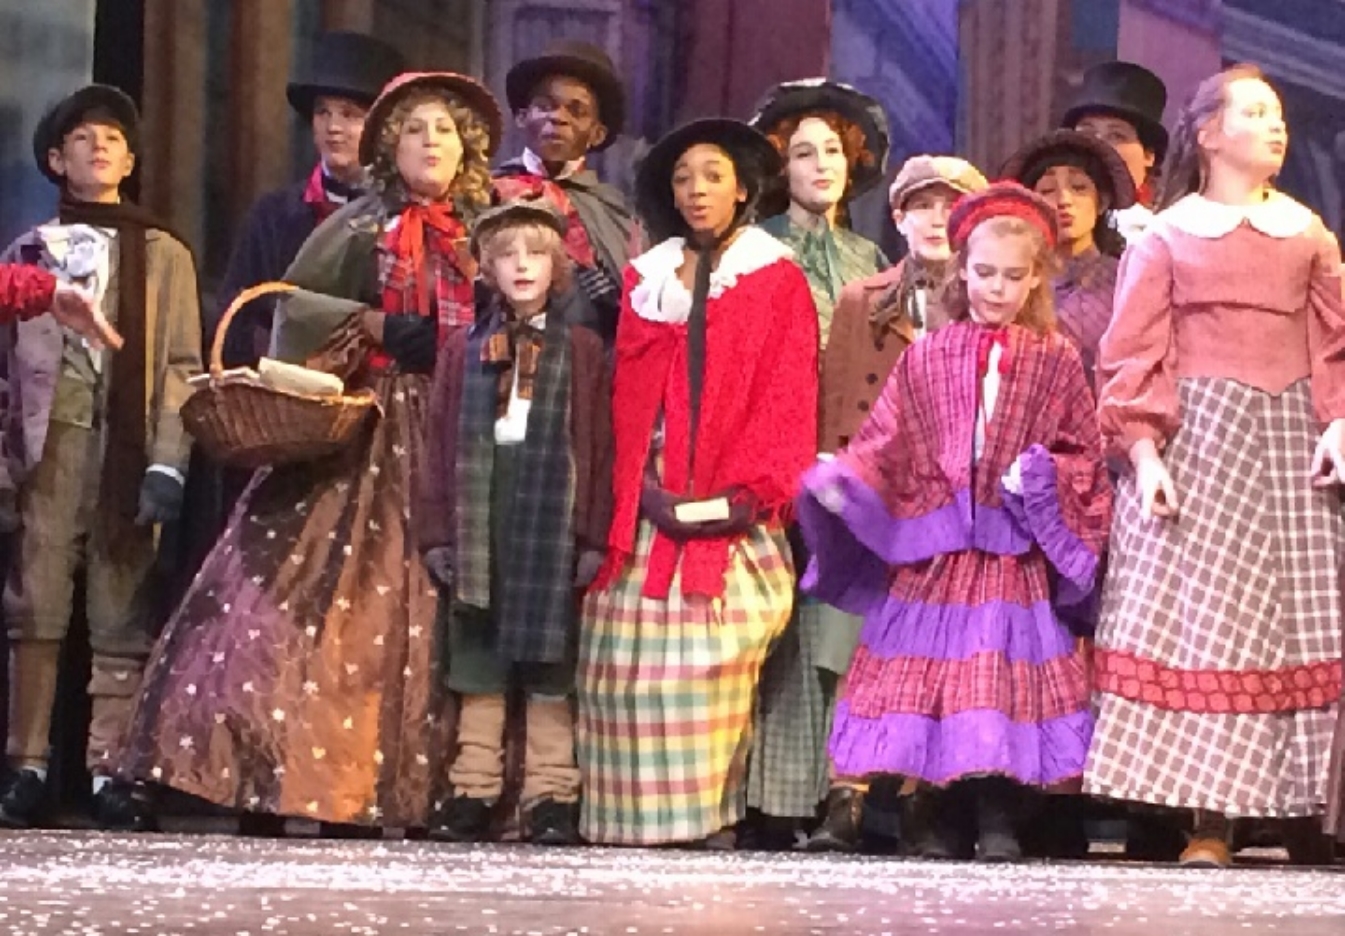 &nbsp;Claudia-Ruthie (pictured center in red shawl) is in the evening viewing of A Christmas Carol. The last performance is December 23!